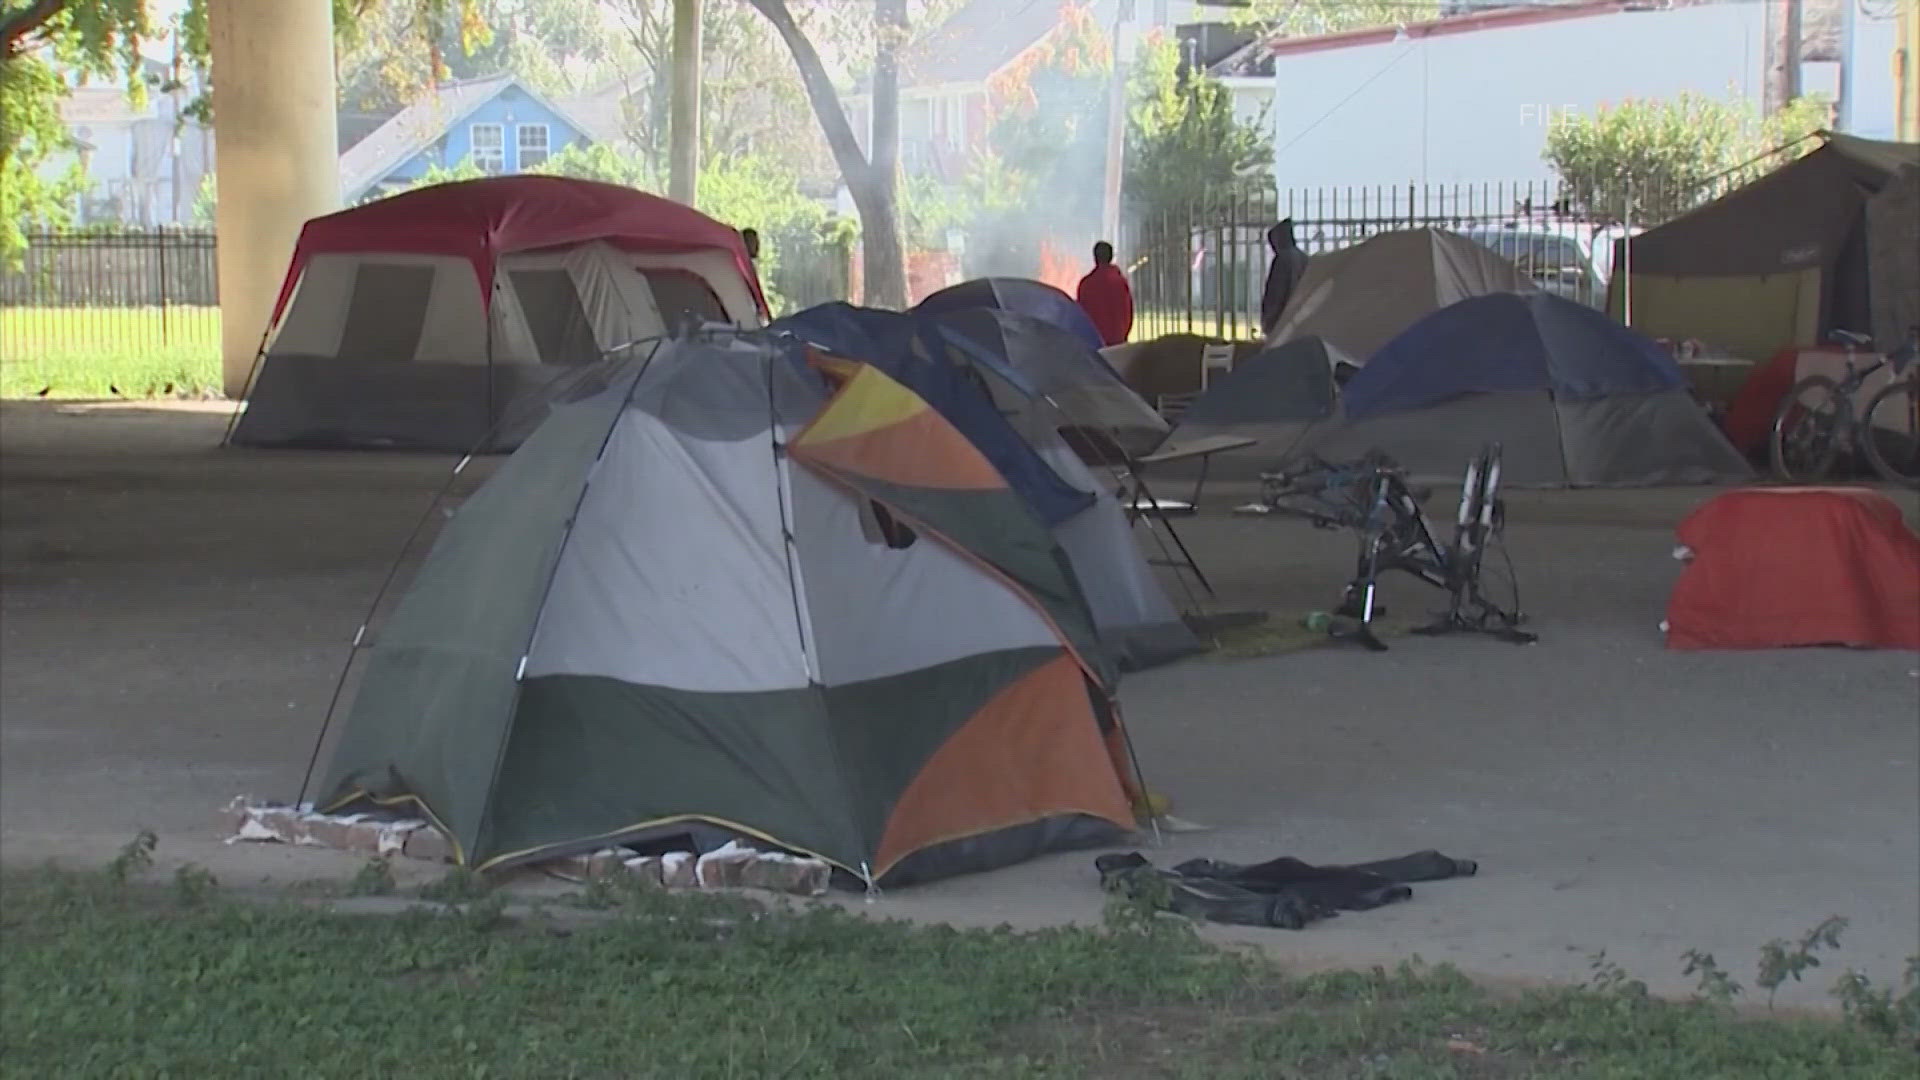 Lawmakers approved a harsher camping ban along the I-225 corridor and established the HEART court, which handles low level offenses by homeless people.